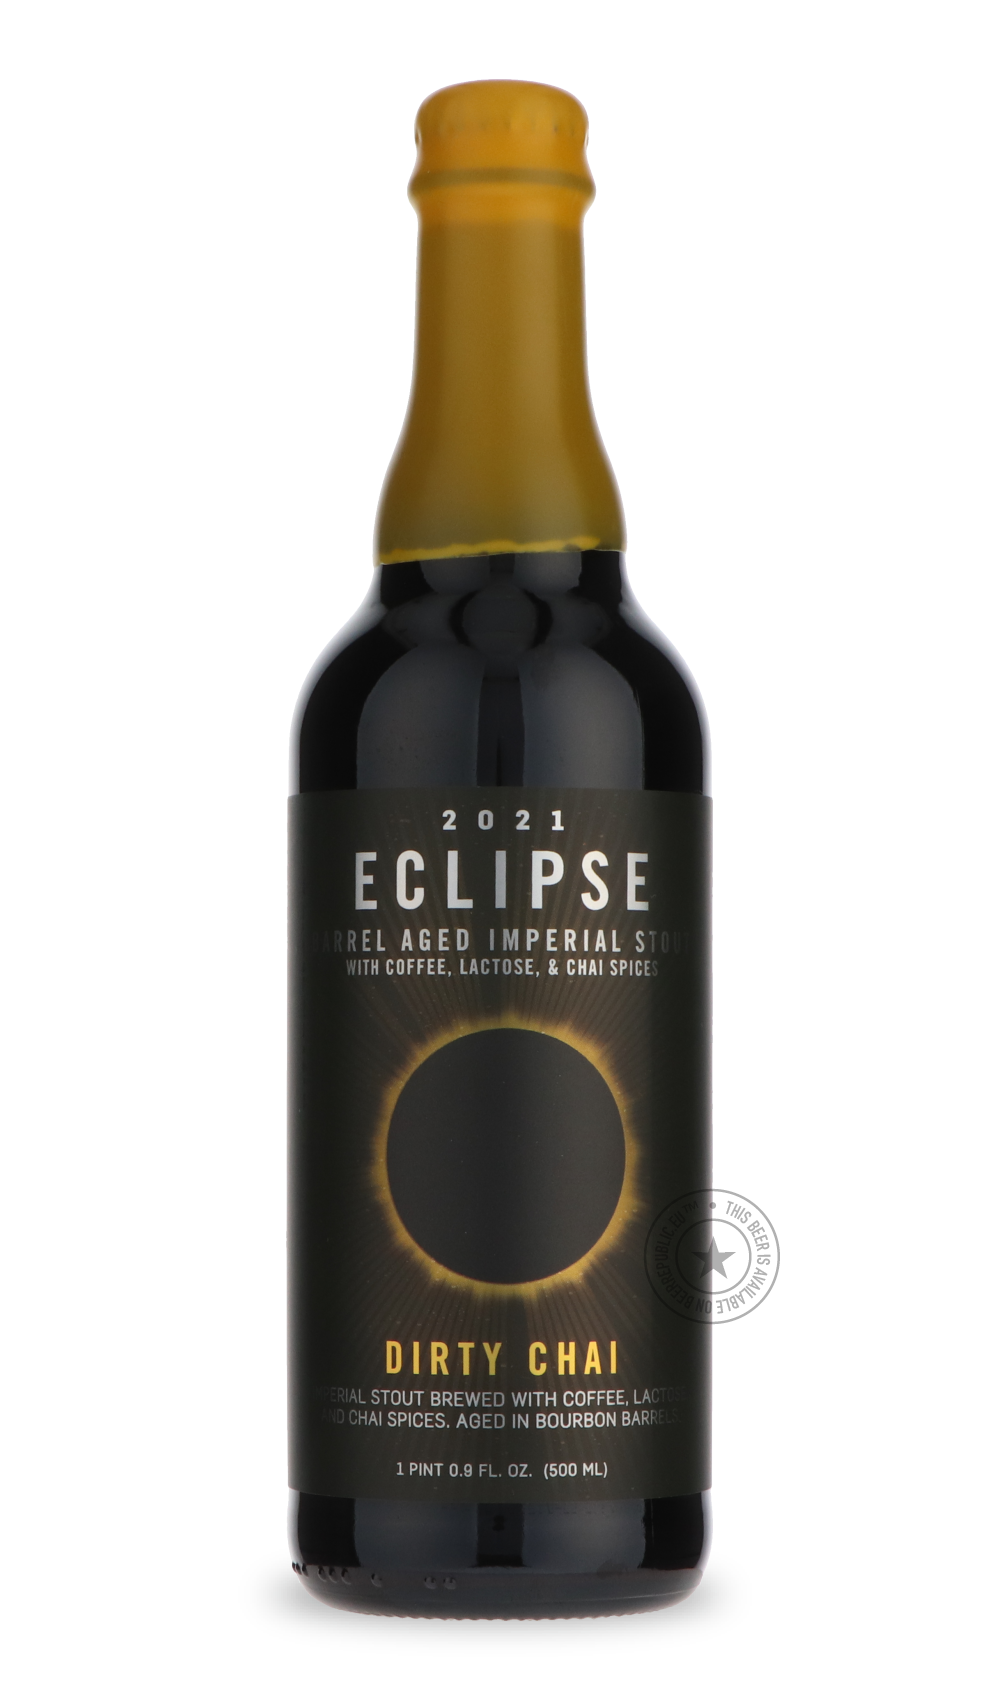 -FiftyFifty- Eclipse Dirty Chai-Stout & Porter- Only @ Beer Republic - The best online beer store for American & Canadian craft beer - Buy beer online from the USA and Canada - Bier online kopen - Amerikaans bier kopen - Craft beer store - Craft beer kopen - Amerikanisch bier kaufen - Bier online kaufen - Acheter biere online - IPA - Stout - Porter - New England IPA - Hazy IPA - Imperial Stout - Barrel Aged - Barrel Aged Imperial Stout - Brown - Dark beer - Blond - Blonde - Pilsner - Lager - Wheat - Weizen 